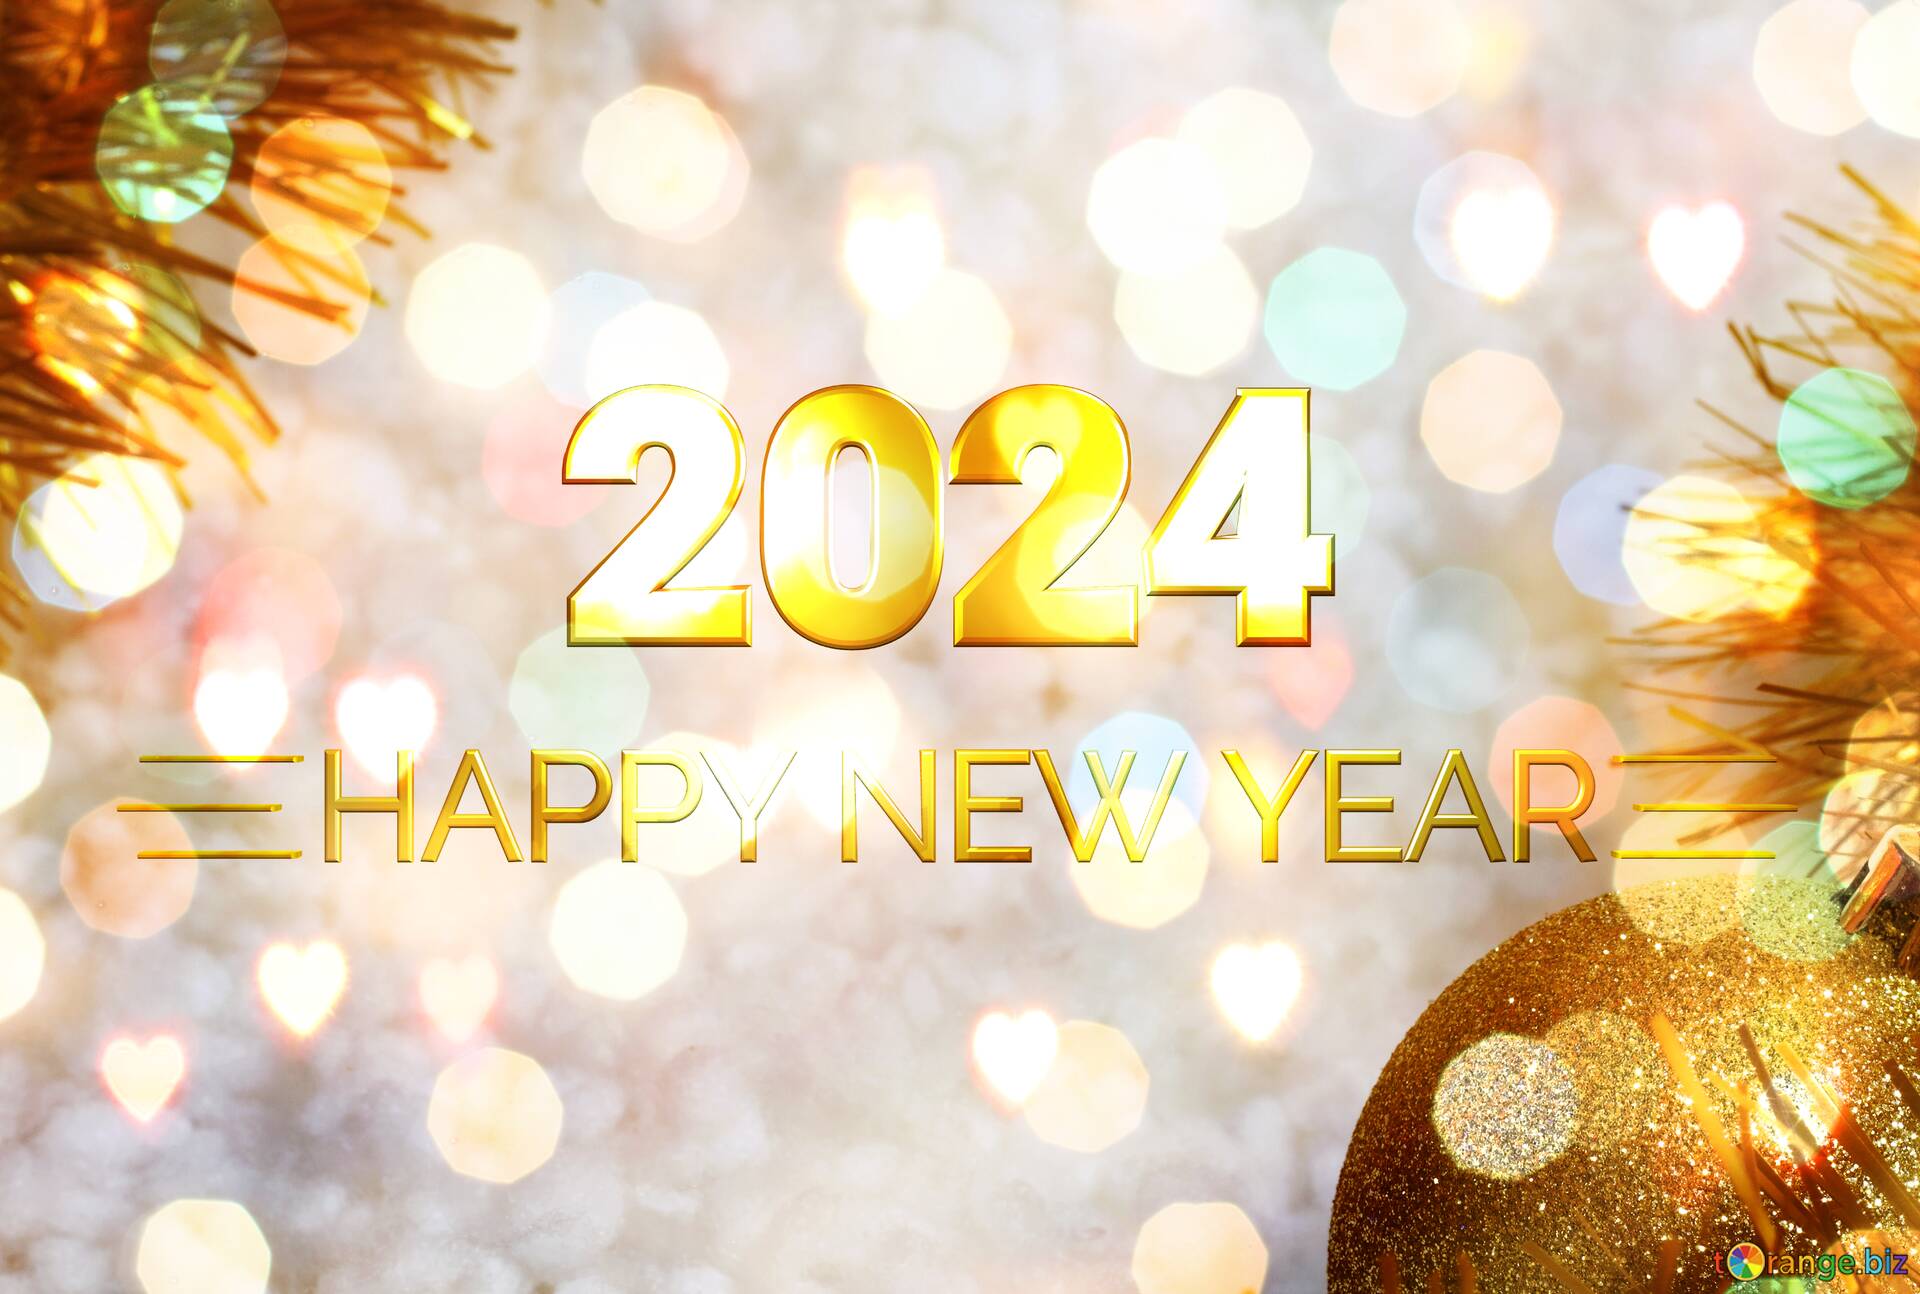 Download free picture New Year snow. 2024 on CCBY License Free Image